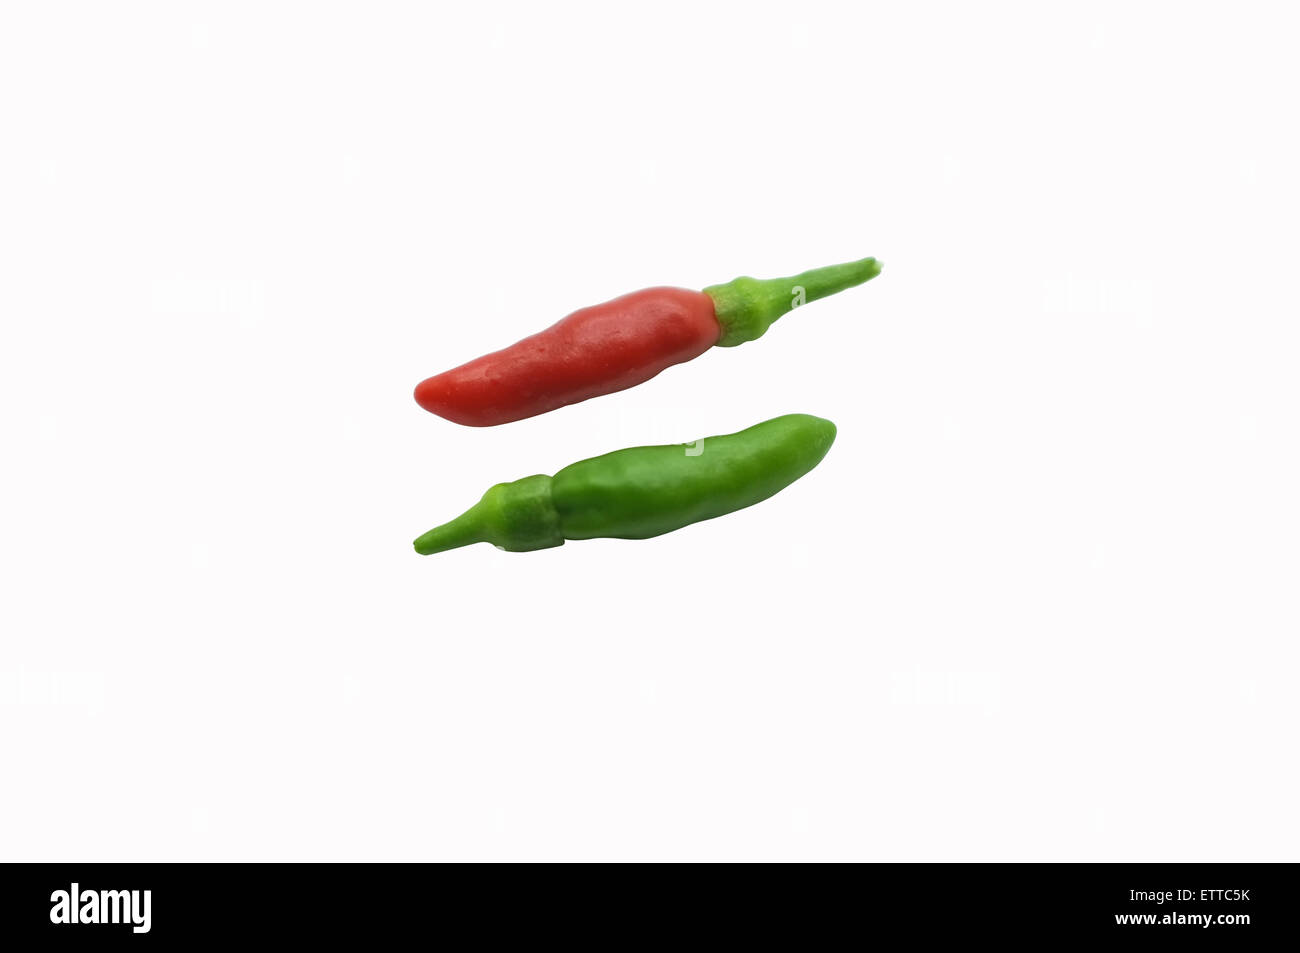 Thai chili pepper, red and green colors, isolated on white background Stock Photo